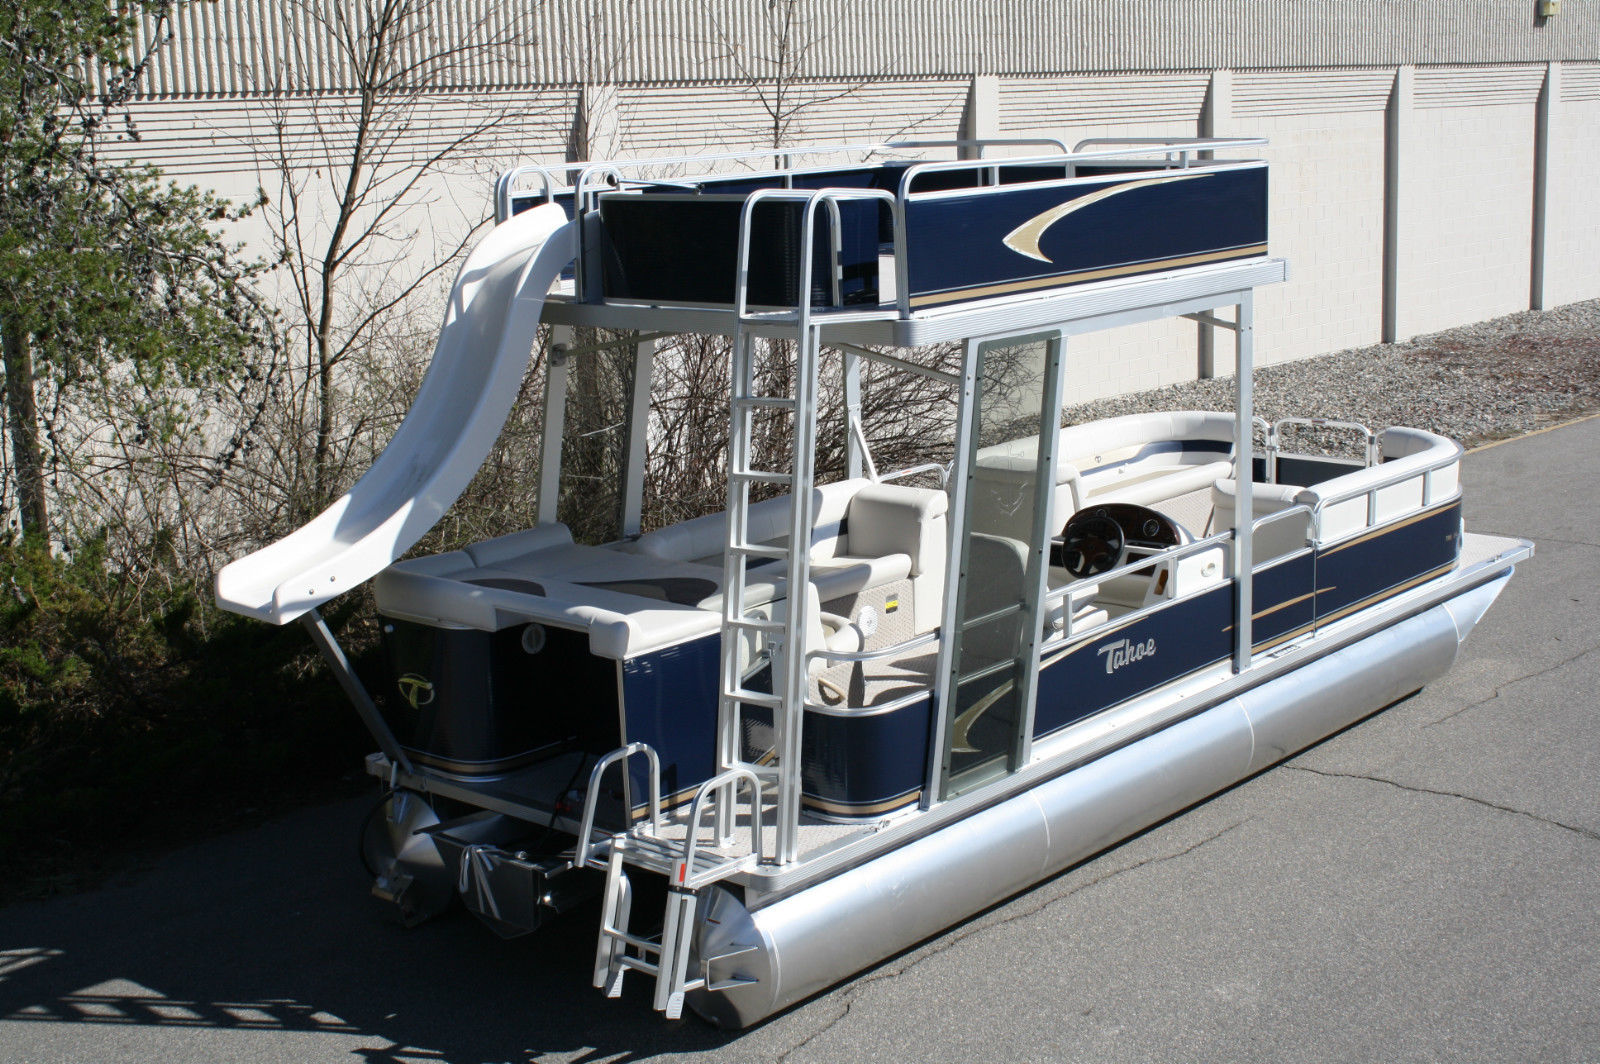 Special---New 24 Ft Pontoon Boat With Slide 2014 for sale ...